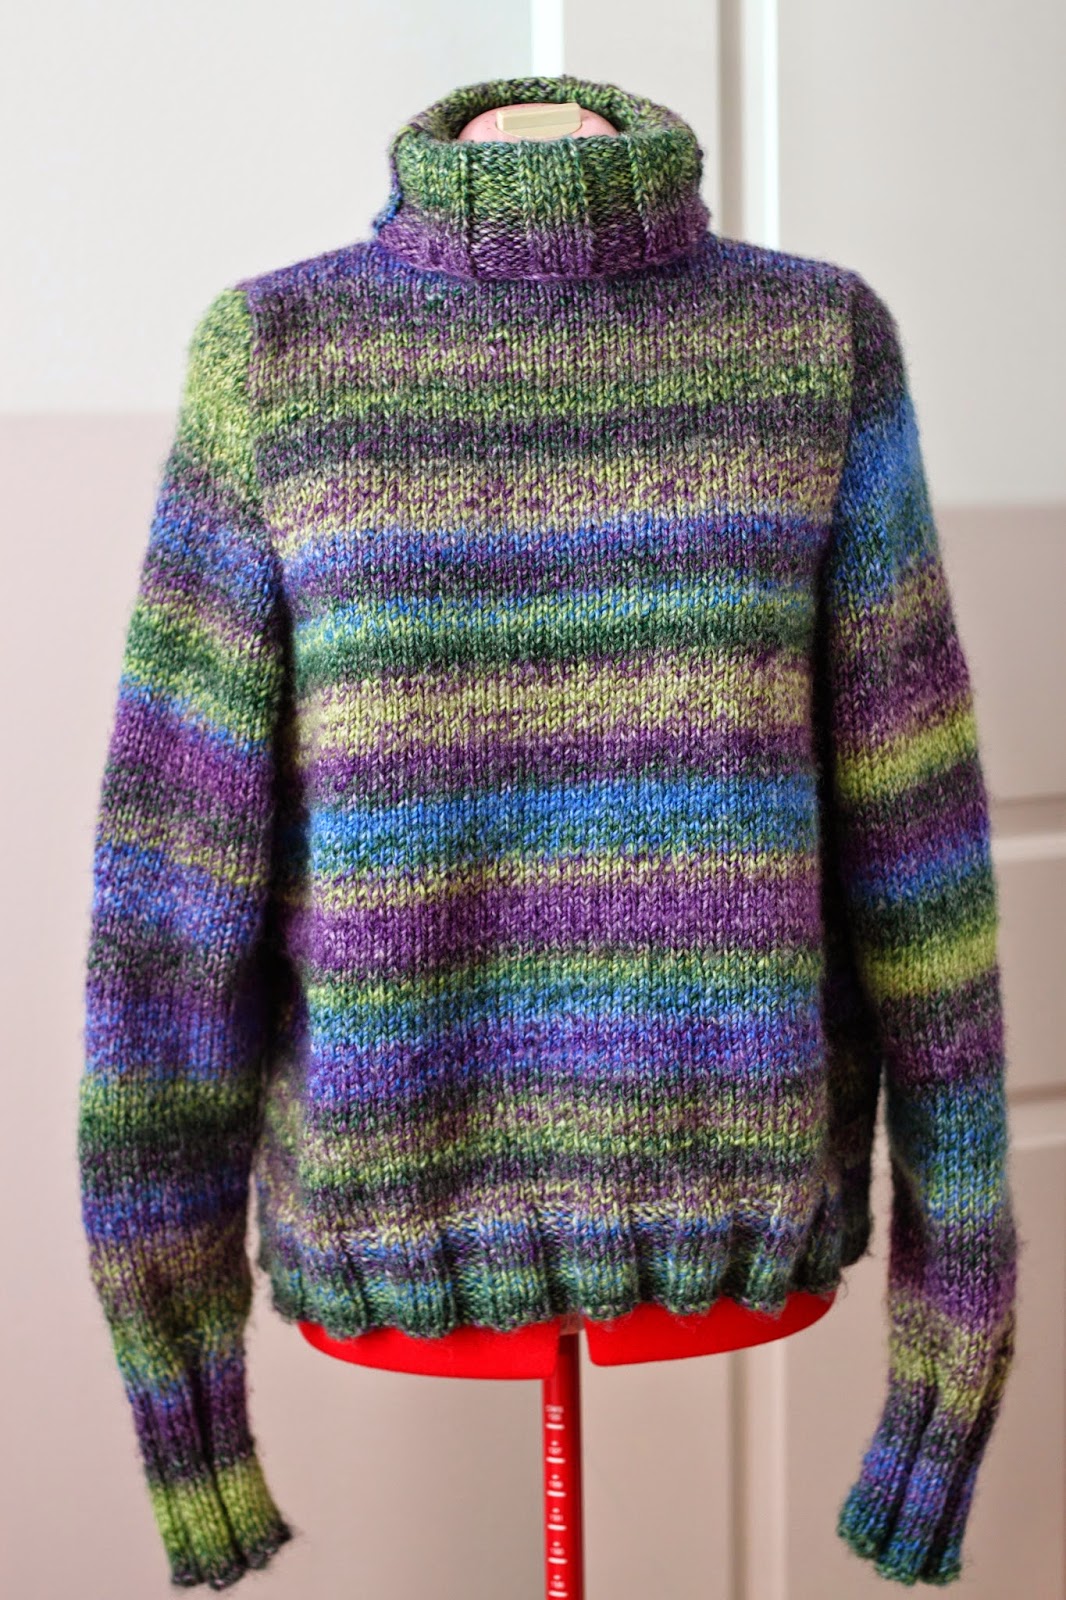 Through the Knitting Lens: The Sweater that Only Took a Year